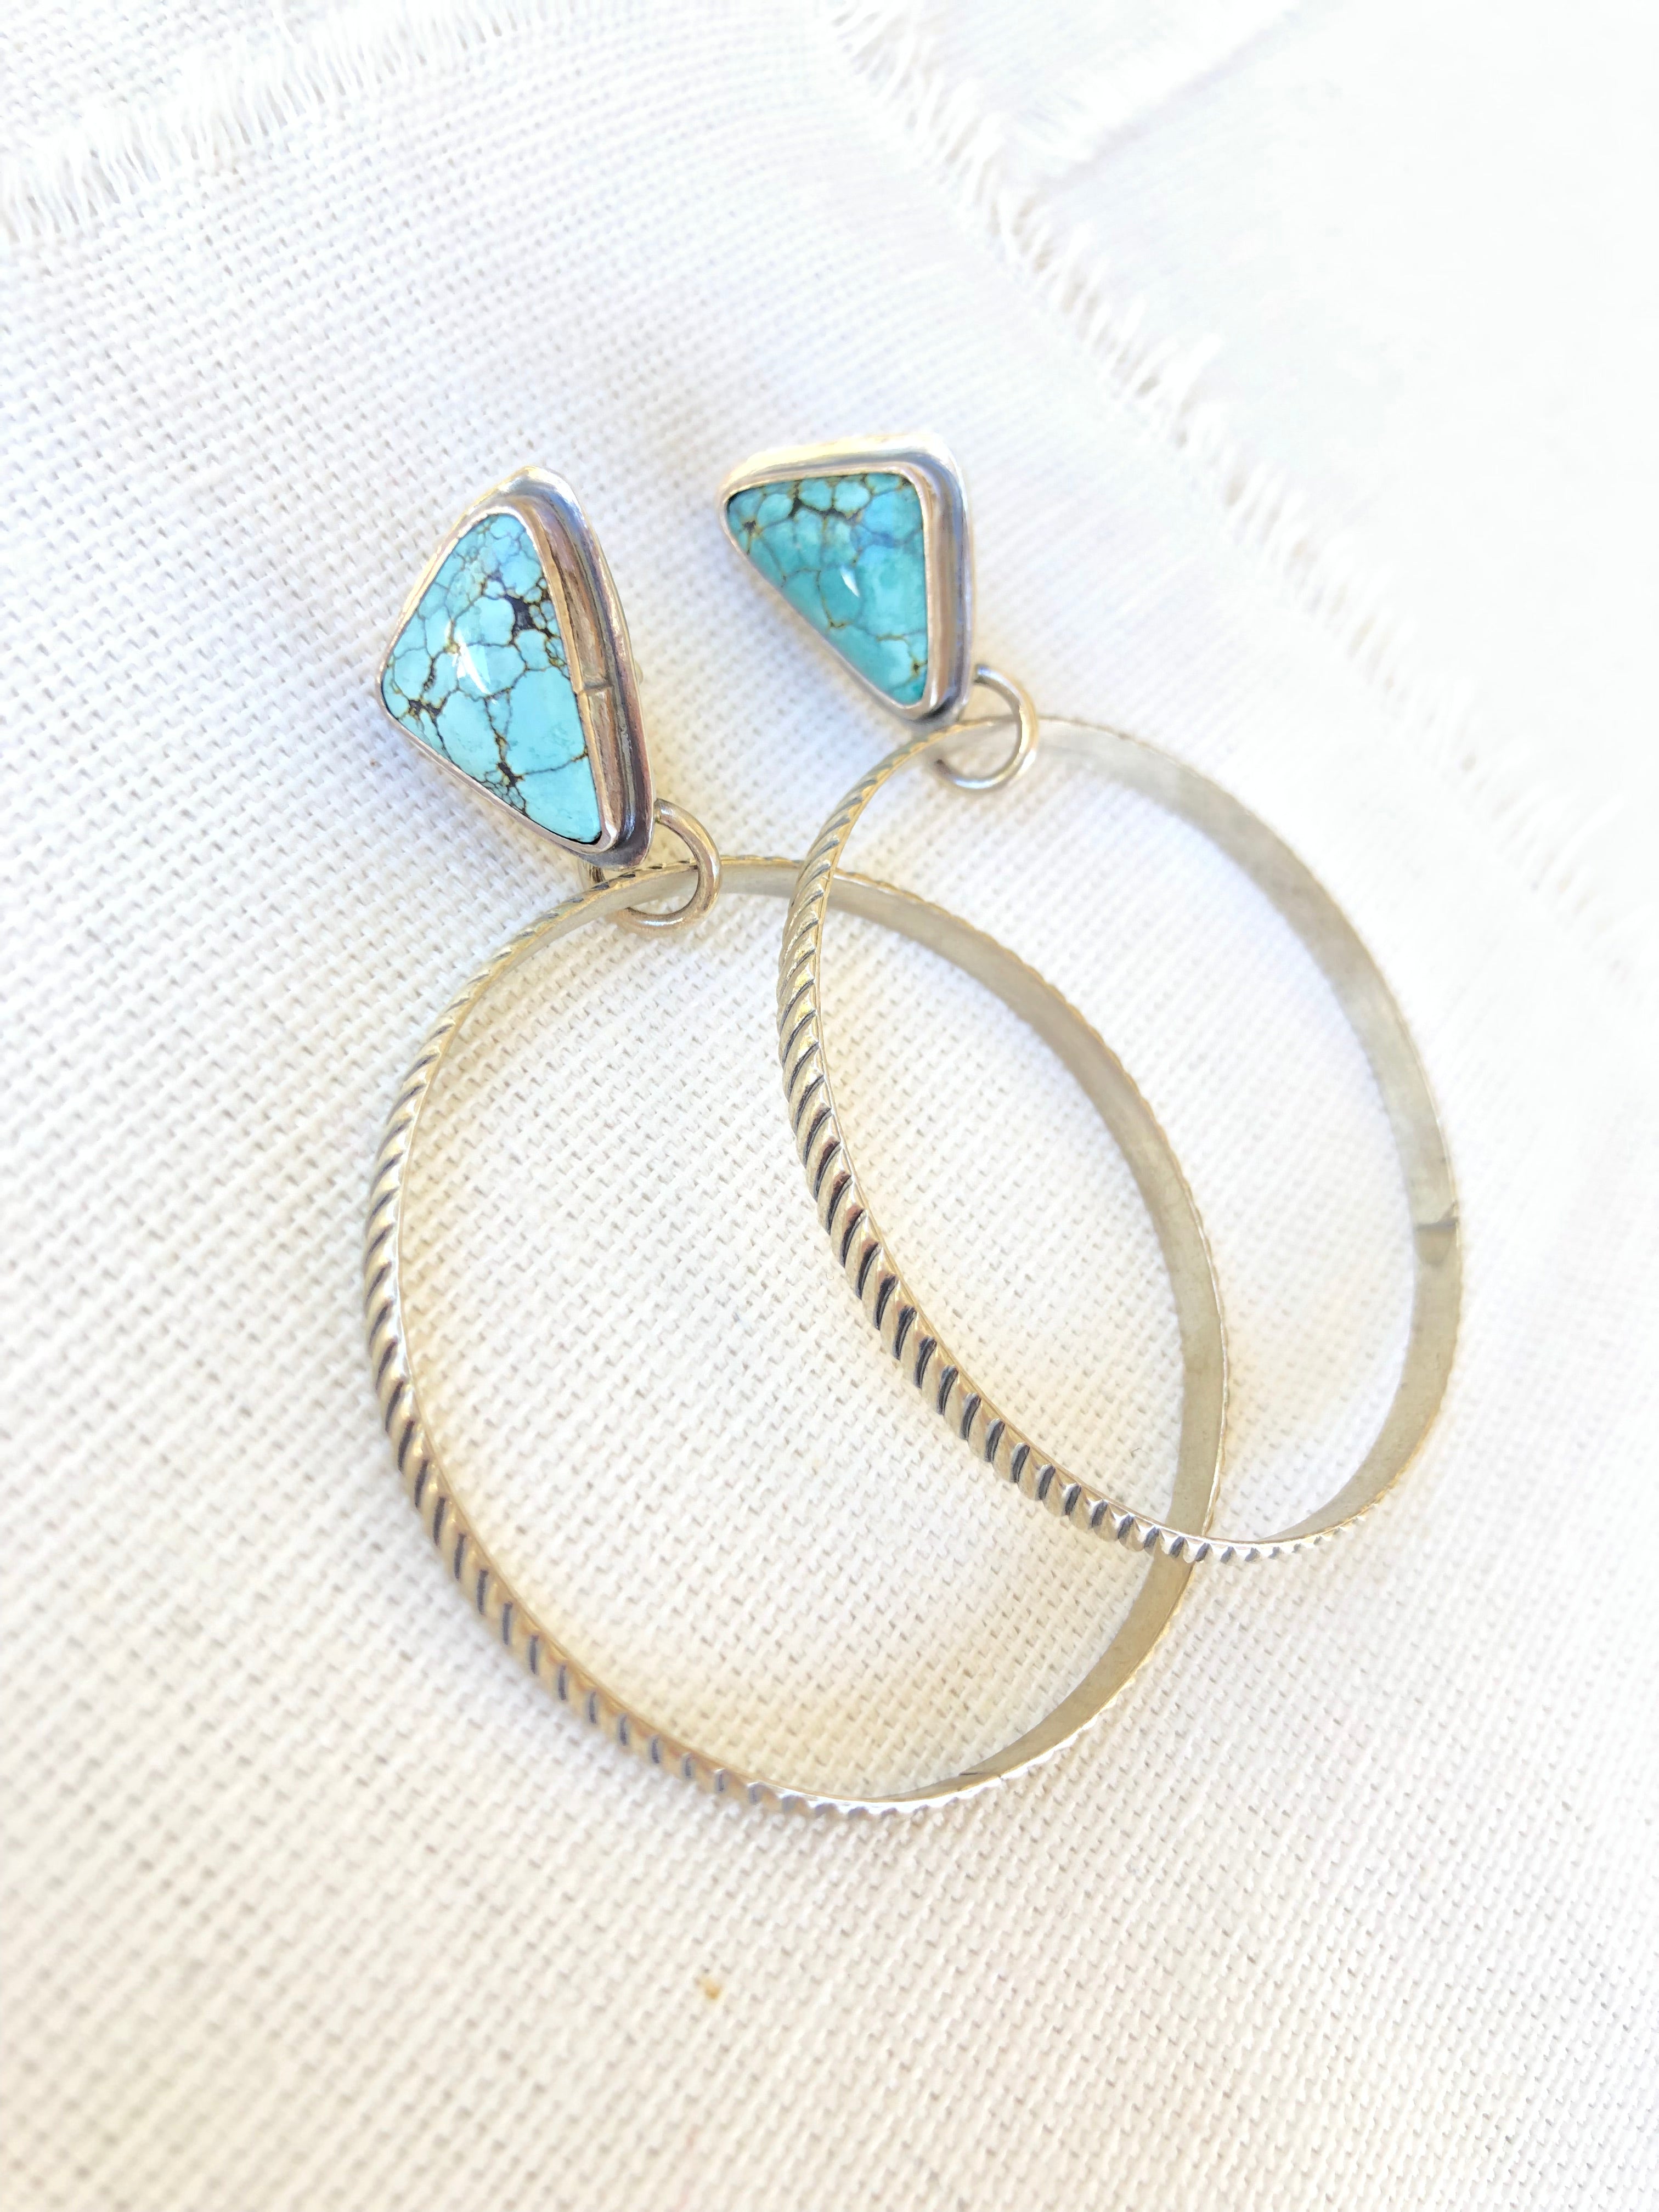 Turquoise Hoop Earrings with Patterned Wire